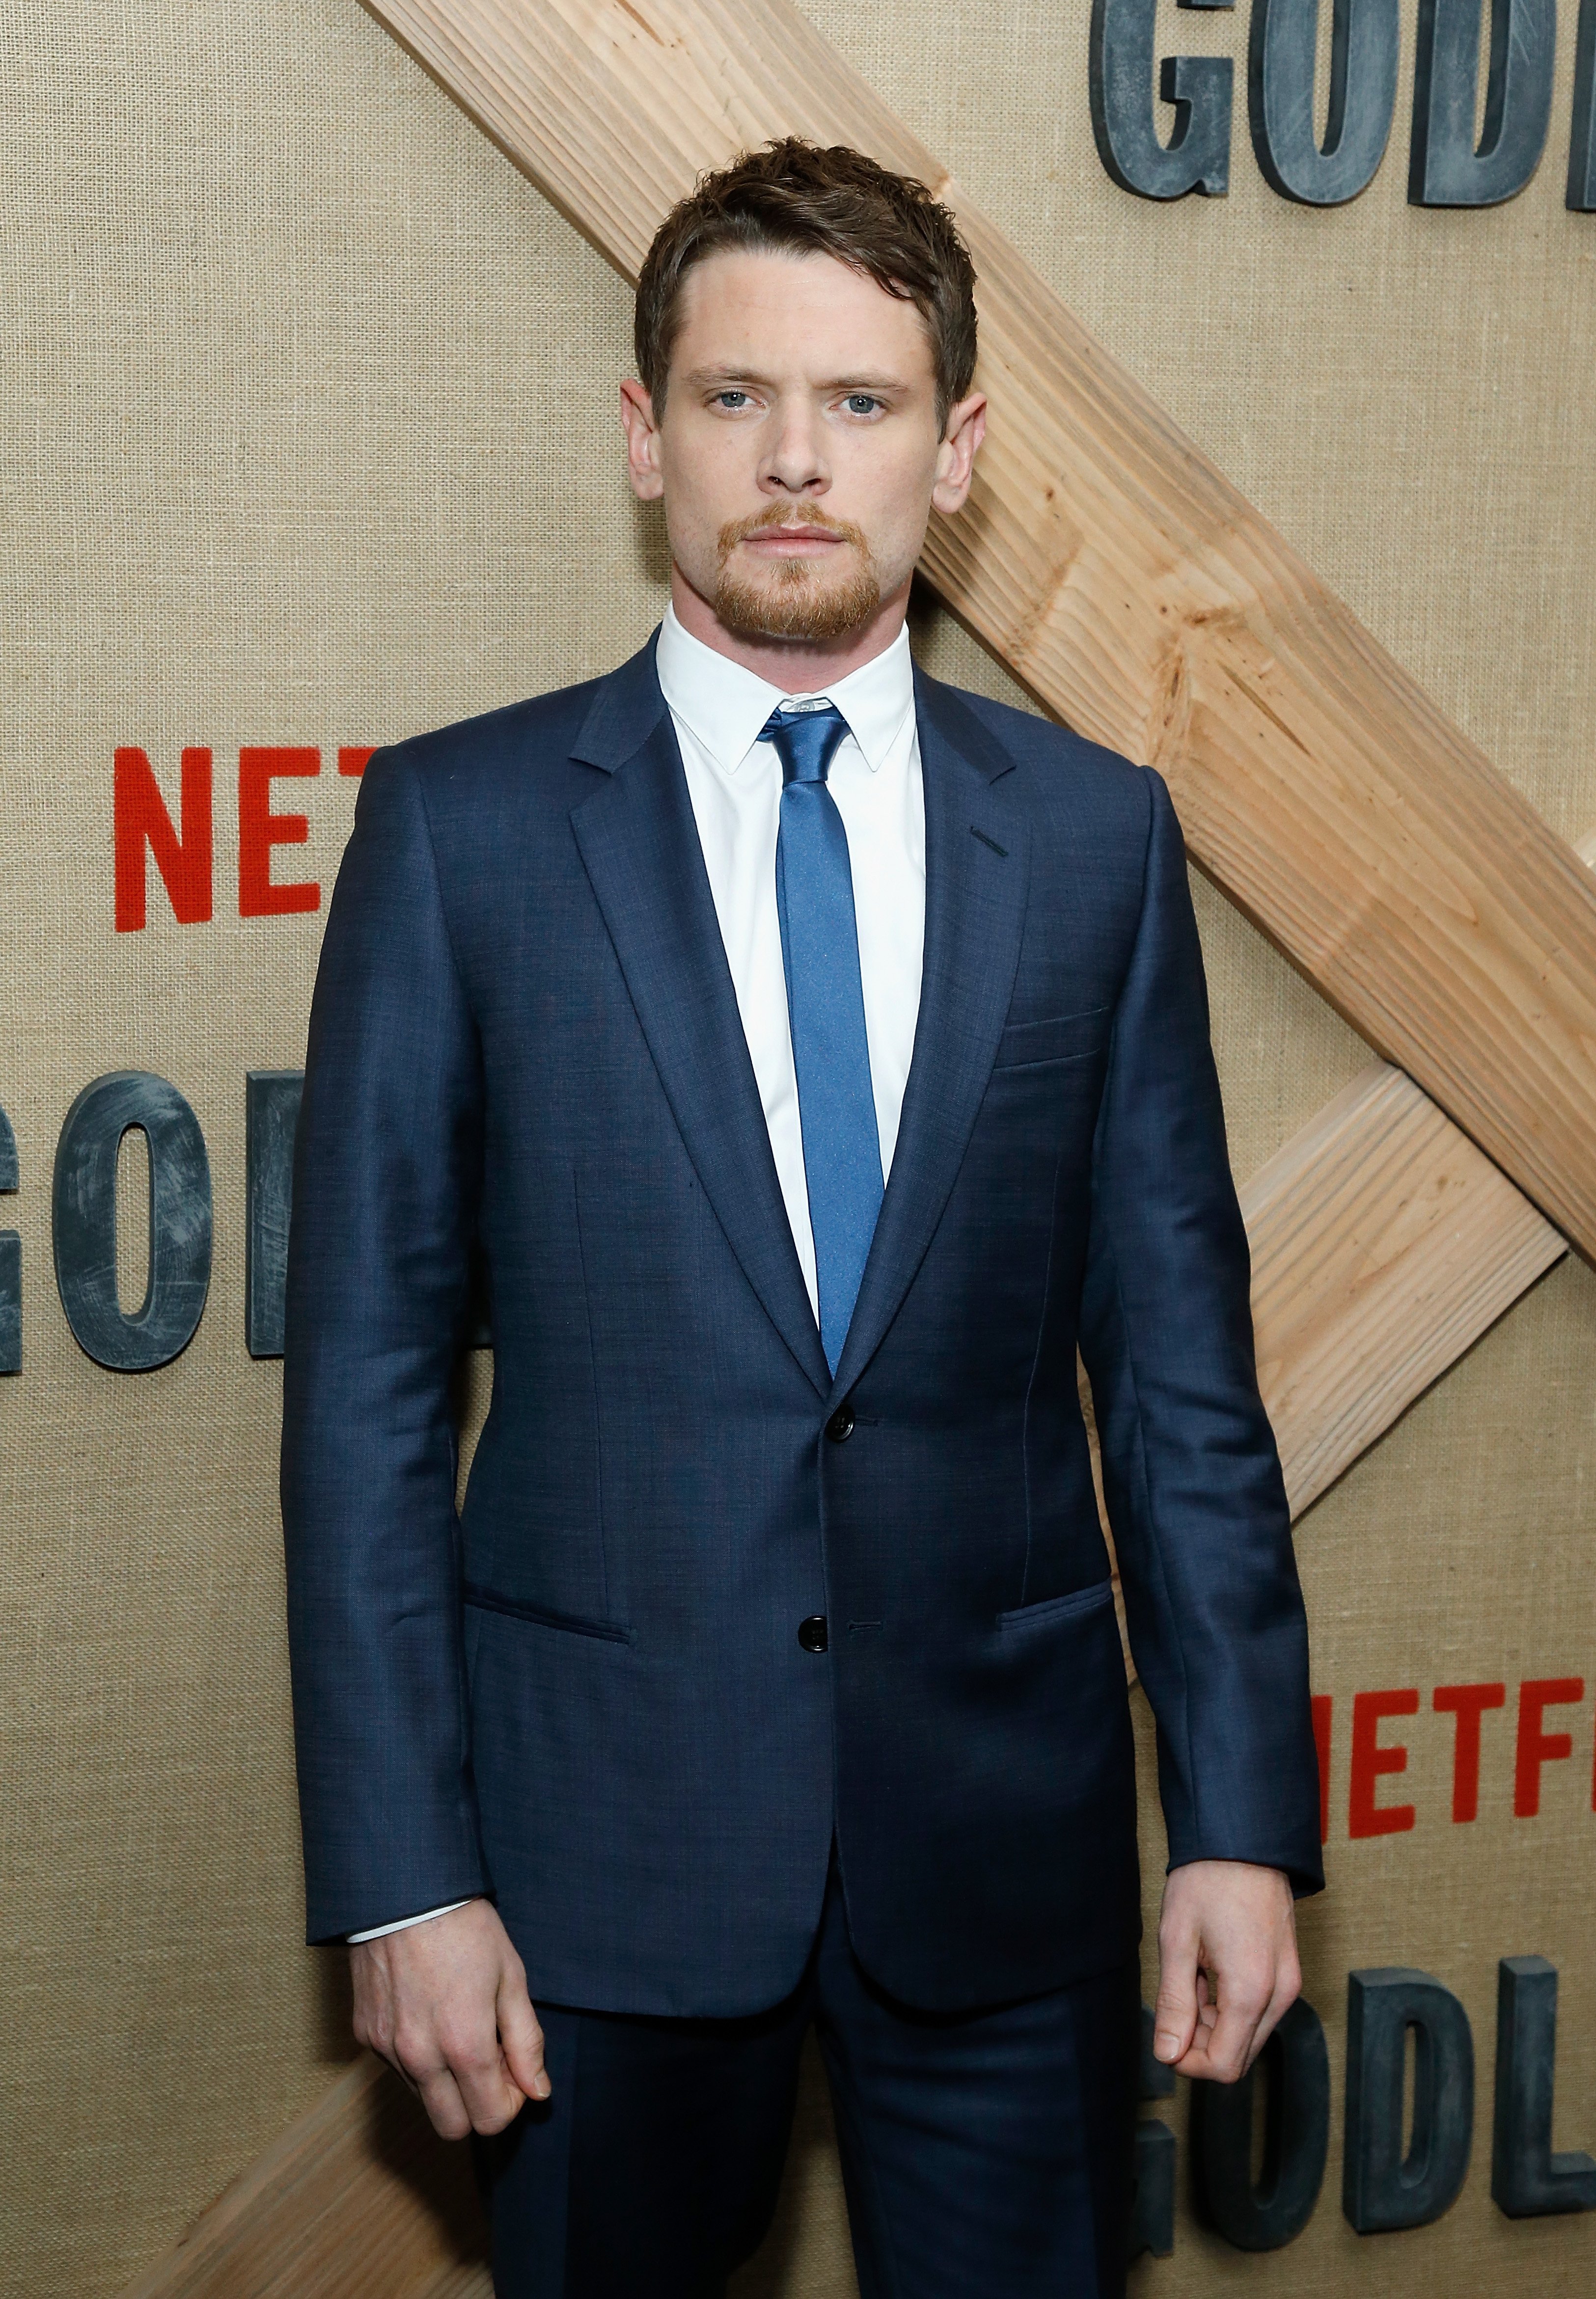 Jack O'Connell at the premiere of "Godless" on November 19, 2017, in New York City | Source: Getty Images